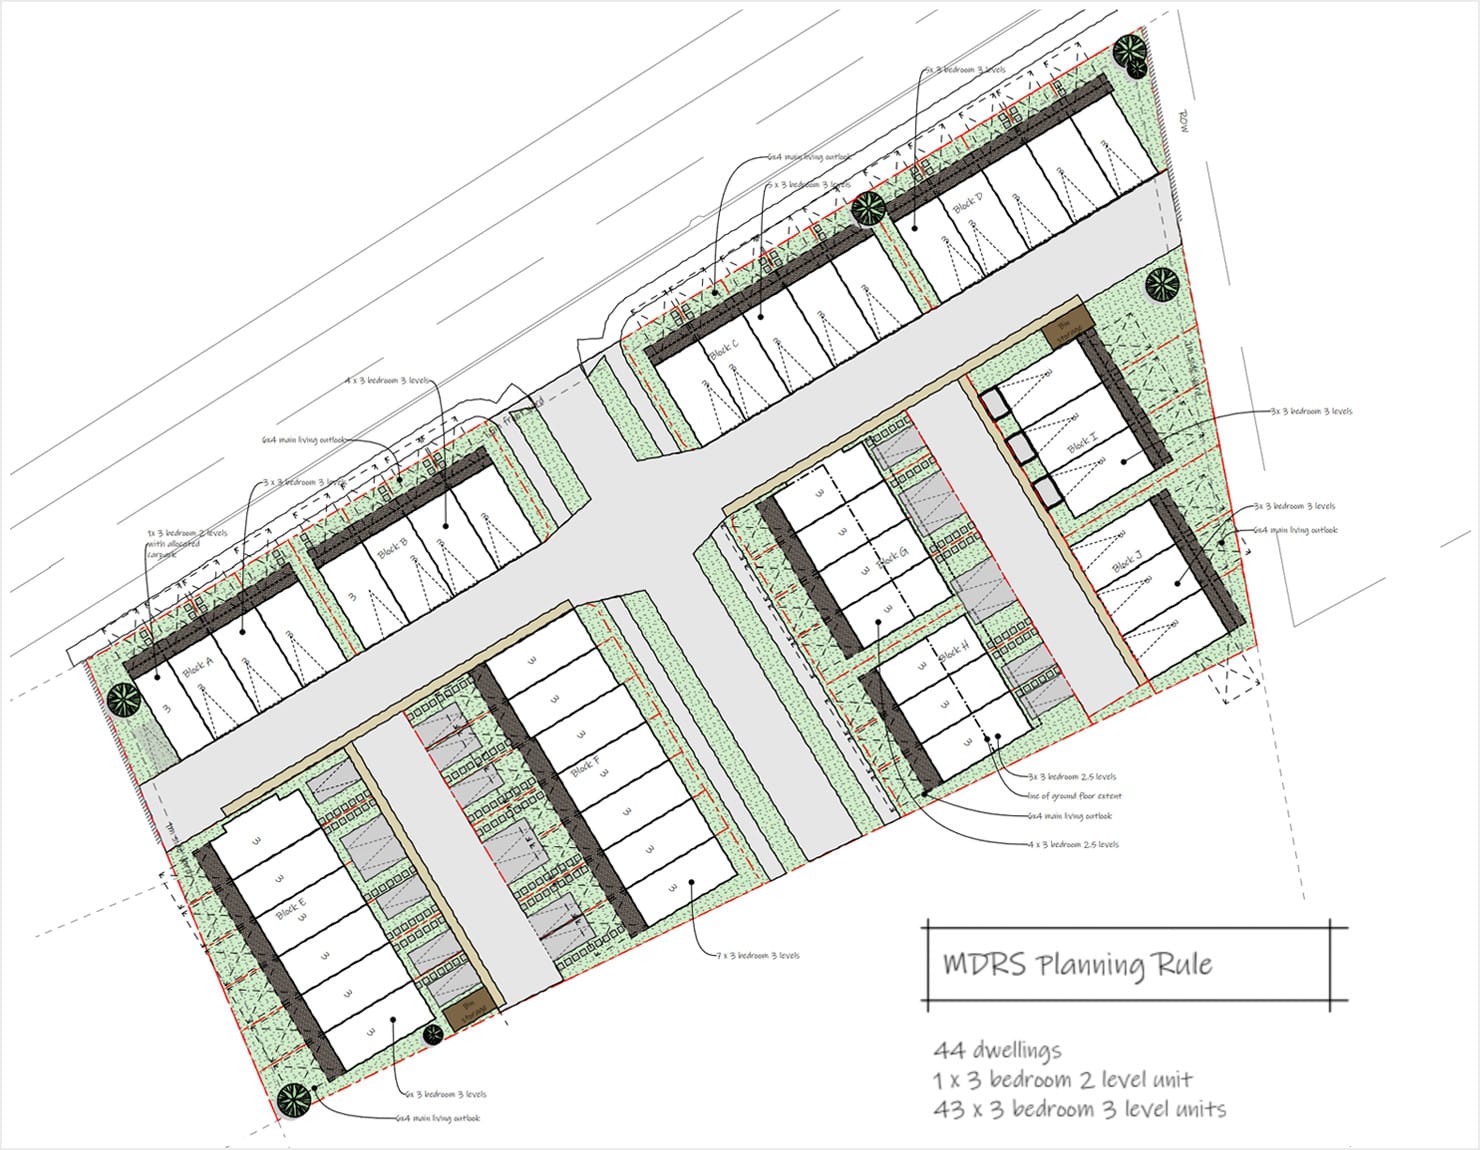 MDRS 44 Dwellings Planning Rule - Property Development - The Importance of Initial Development Feasibility and Concept Option Analysis